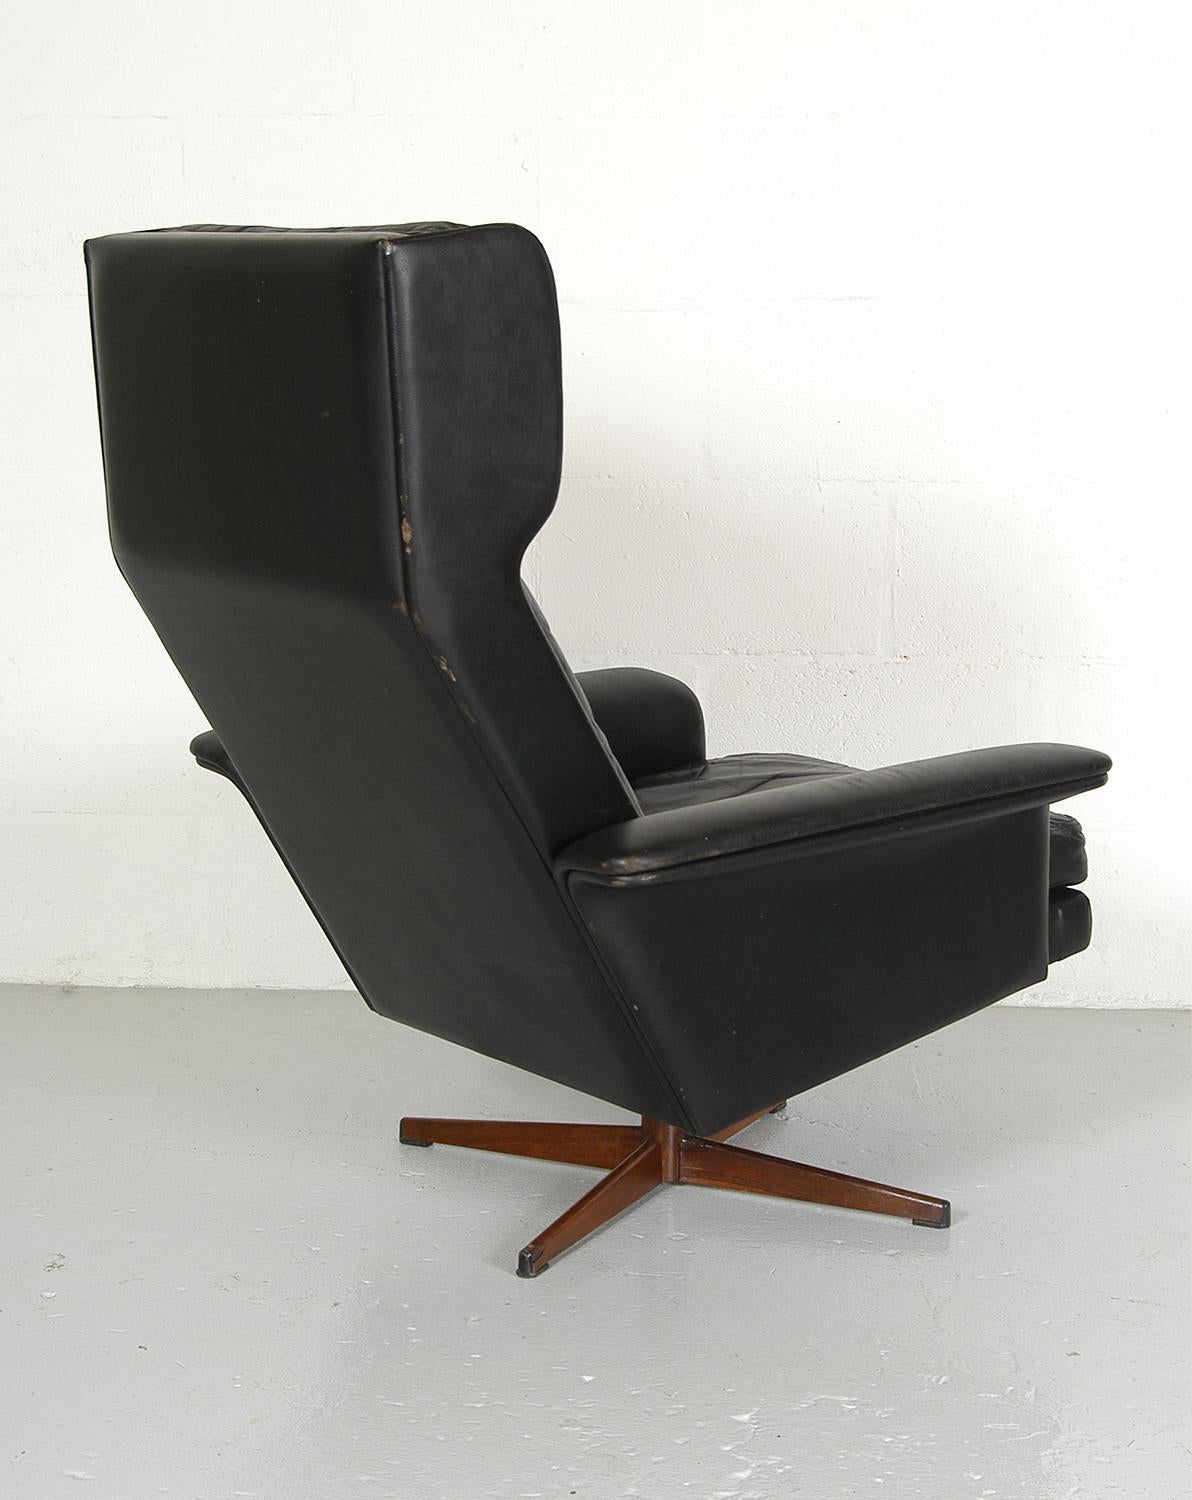 Pair Midcentury Danish Leather Lounge Chairs by Komfort designed HW Klein 1960s 1